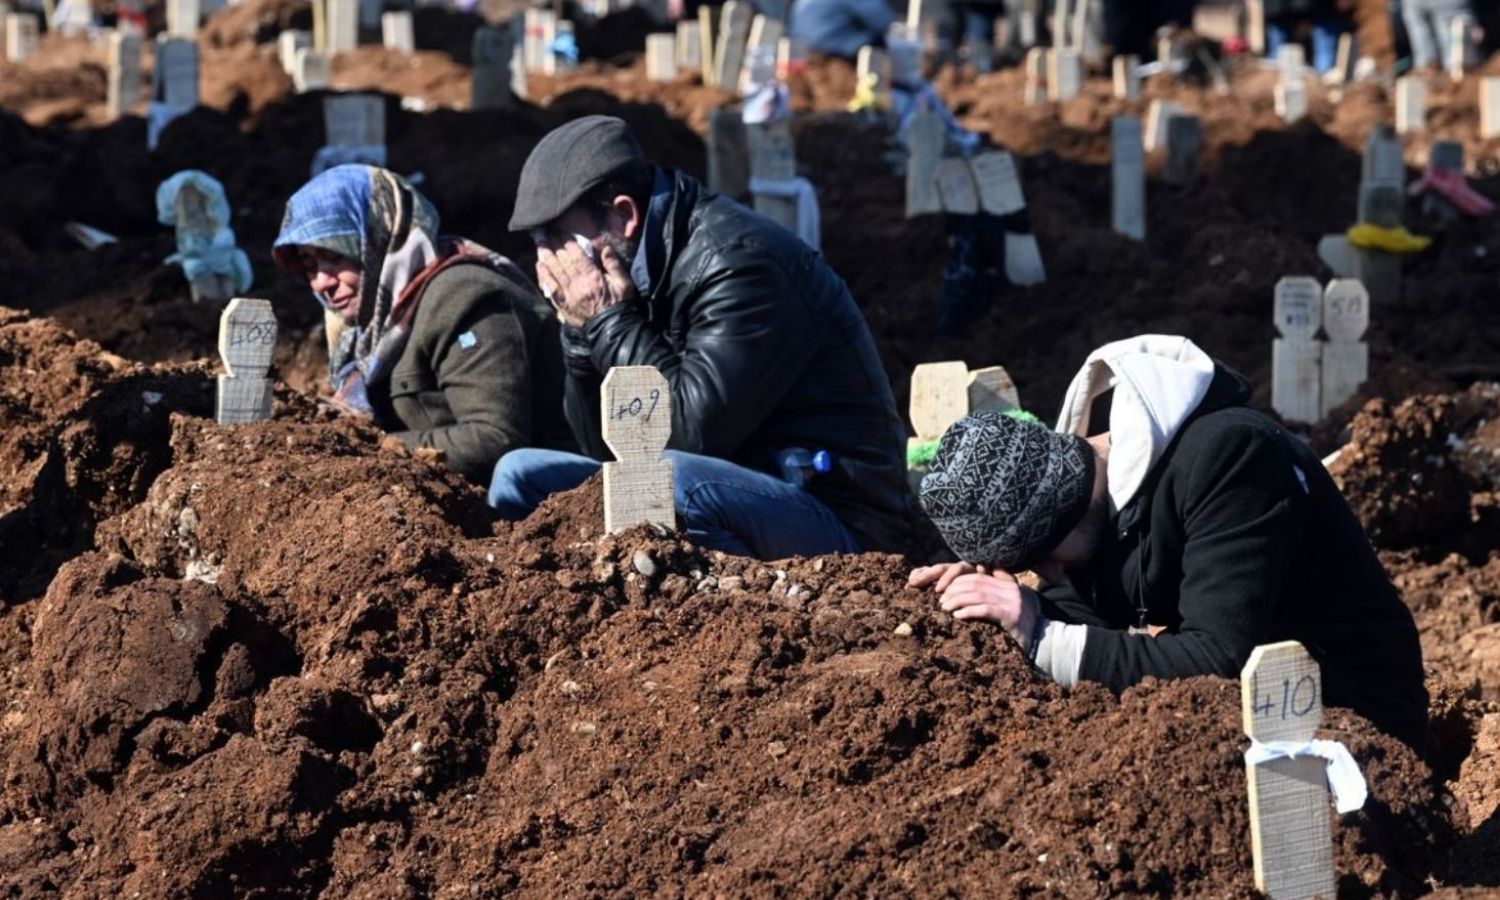 A mass grave for unidentified victims of the earthquake in Adıyaman, southern Turkey - February 10, 2023 (Halk TV)